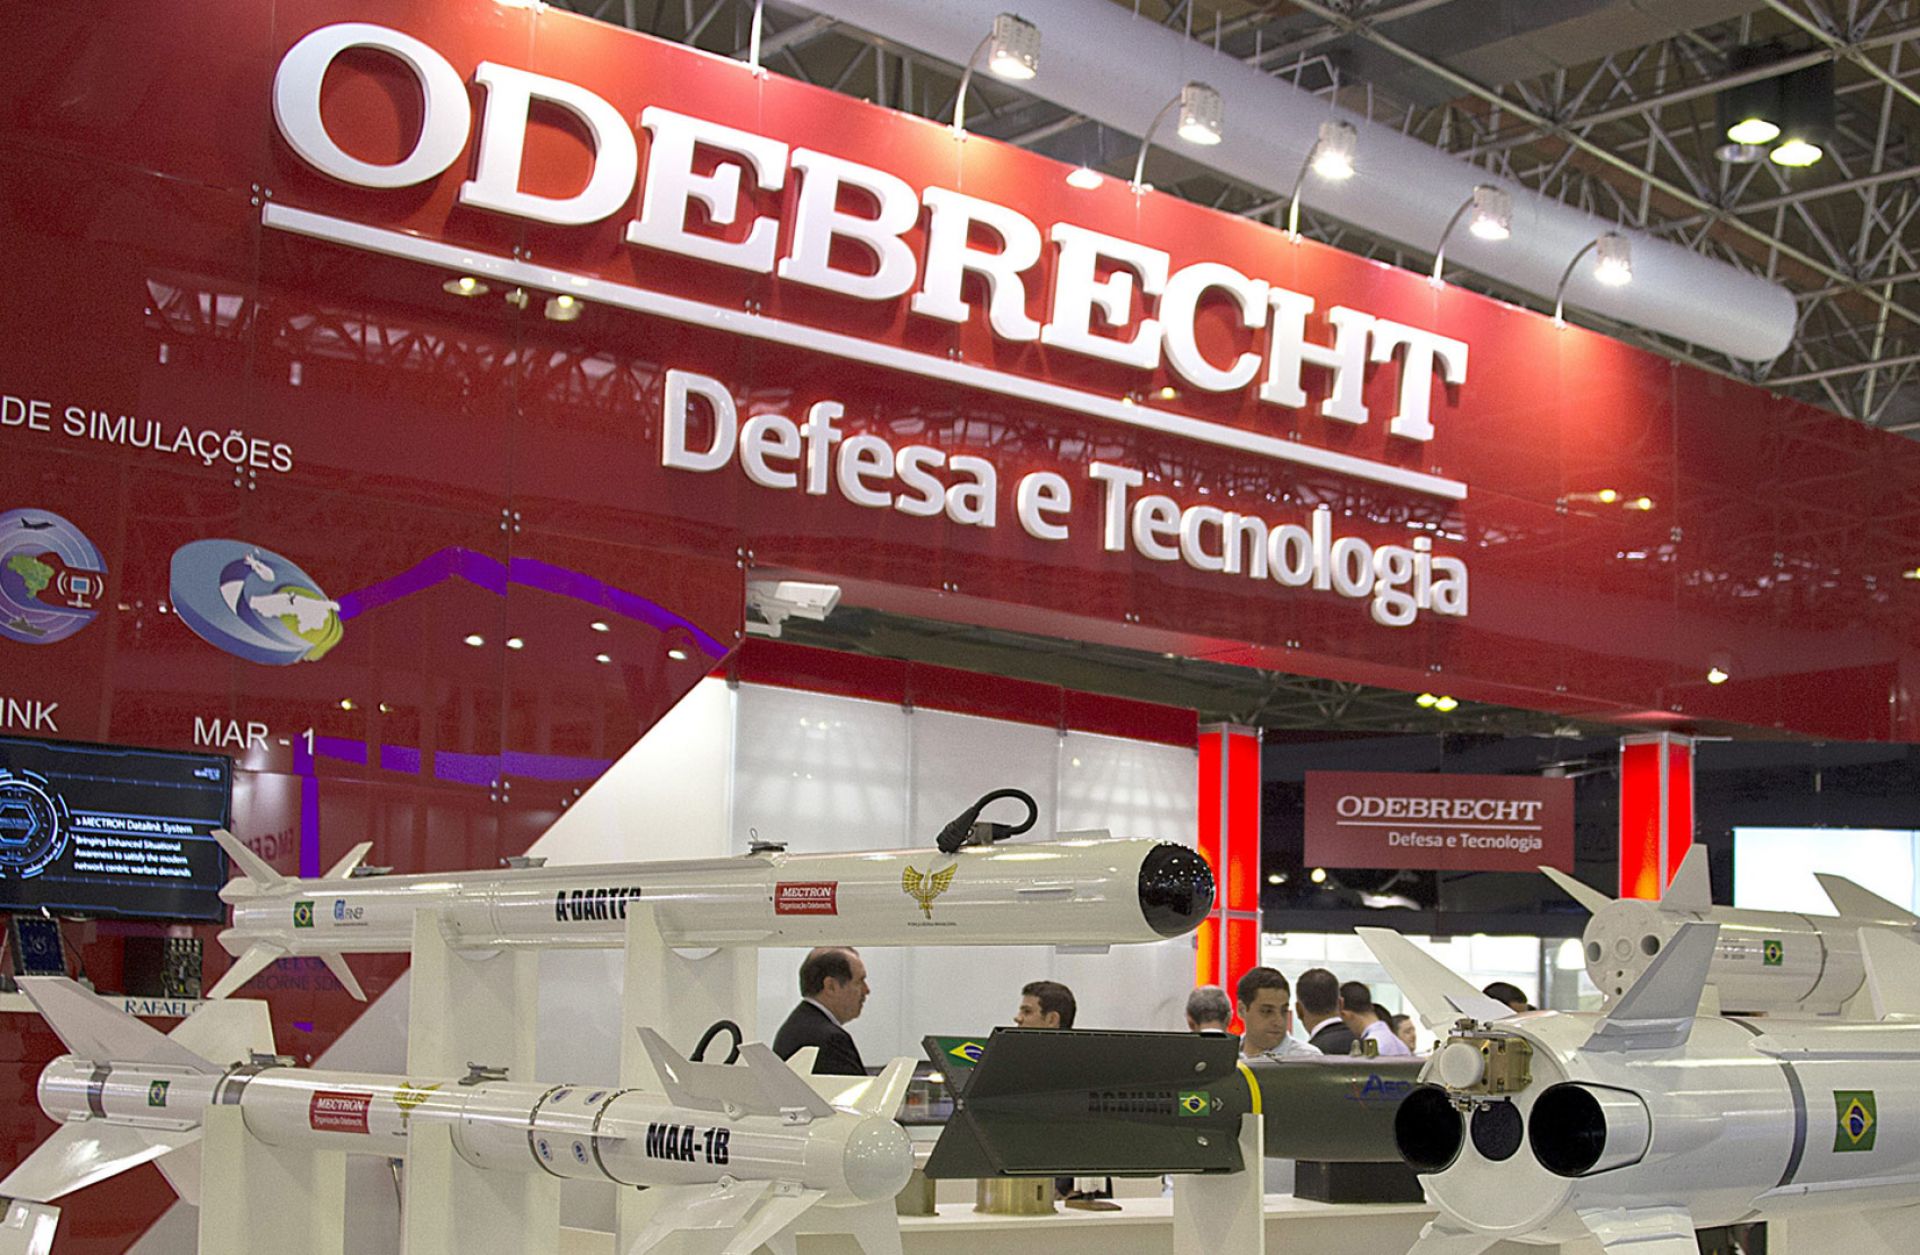 The scandal at engineering company Odebrecht could topple the Brazilian president.